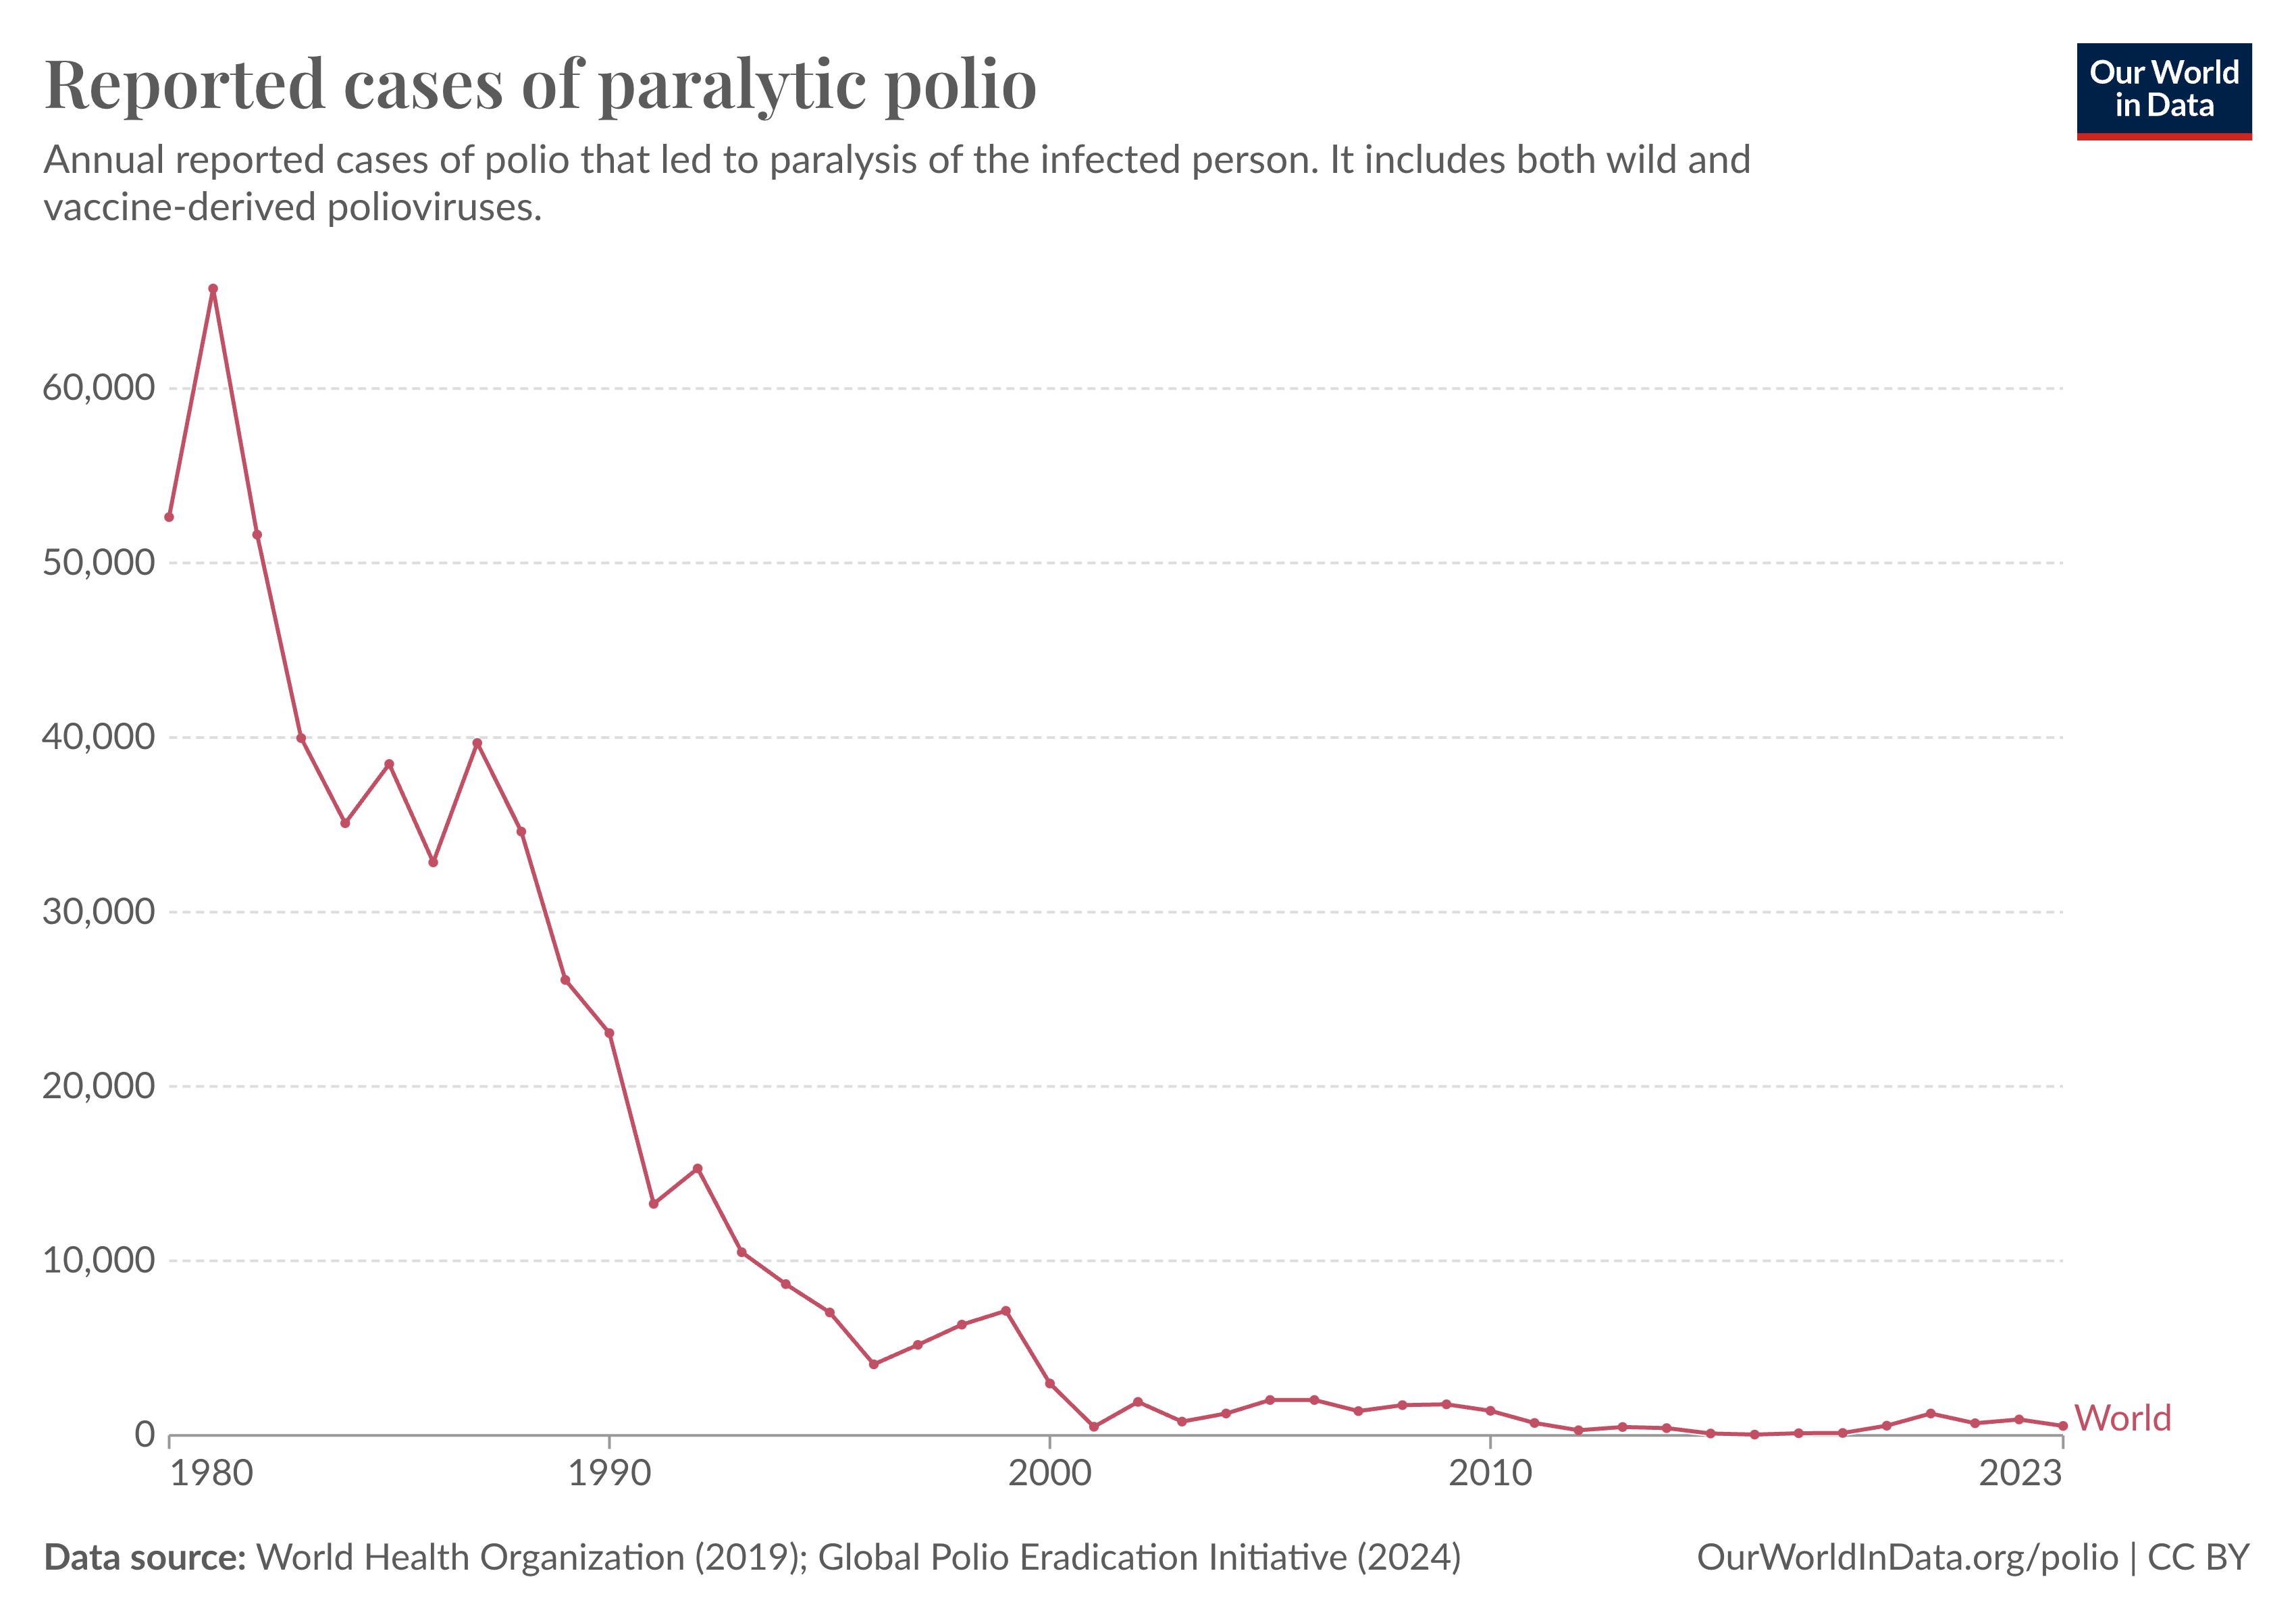 The image is a line graph titled "Reported cases of paralytic polio." It shows the annual reported cases of paralytic polio, including both cases from wild polioviruses and vaccine-derived polioviruses from 1980 to 2023. The line starts near 60,000 cases in 1980, sharply decreases to below 20,000 by the mid-1980s, and continues to decline steadily to just a few hundred cases by 2023. The x-axis represents the years, and the y-axis represents the number of cases. There are horizontal grid lines aiding in the reading of case numbers. At the bottom, the data source is credited to the World Health Organization (2019) and the Global Polio Eradication Initiative (2024). On the right side of the image is a logo with the text "Our World in Data." The website "OurWorldInData.org/polio" is listed along with a CC BY license notification.





